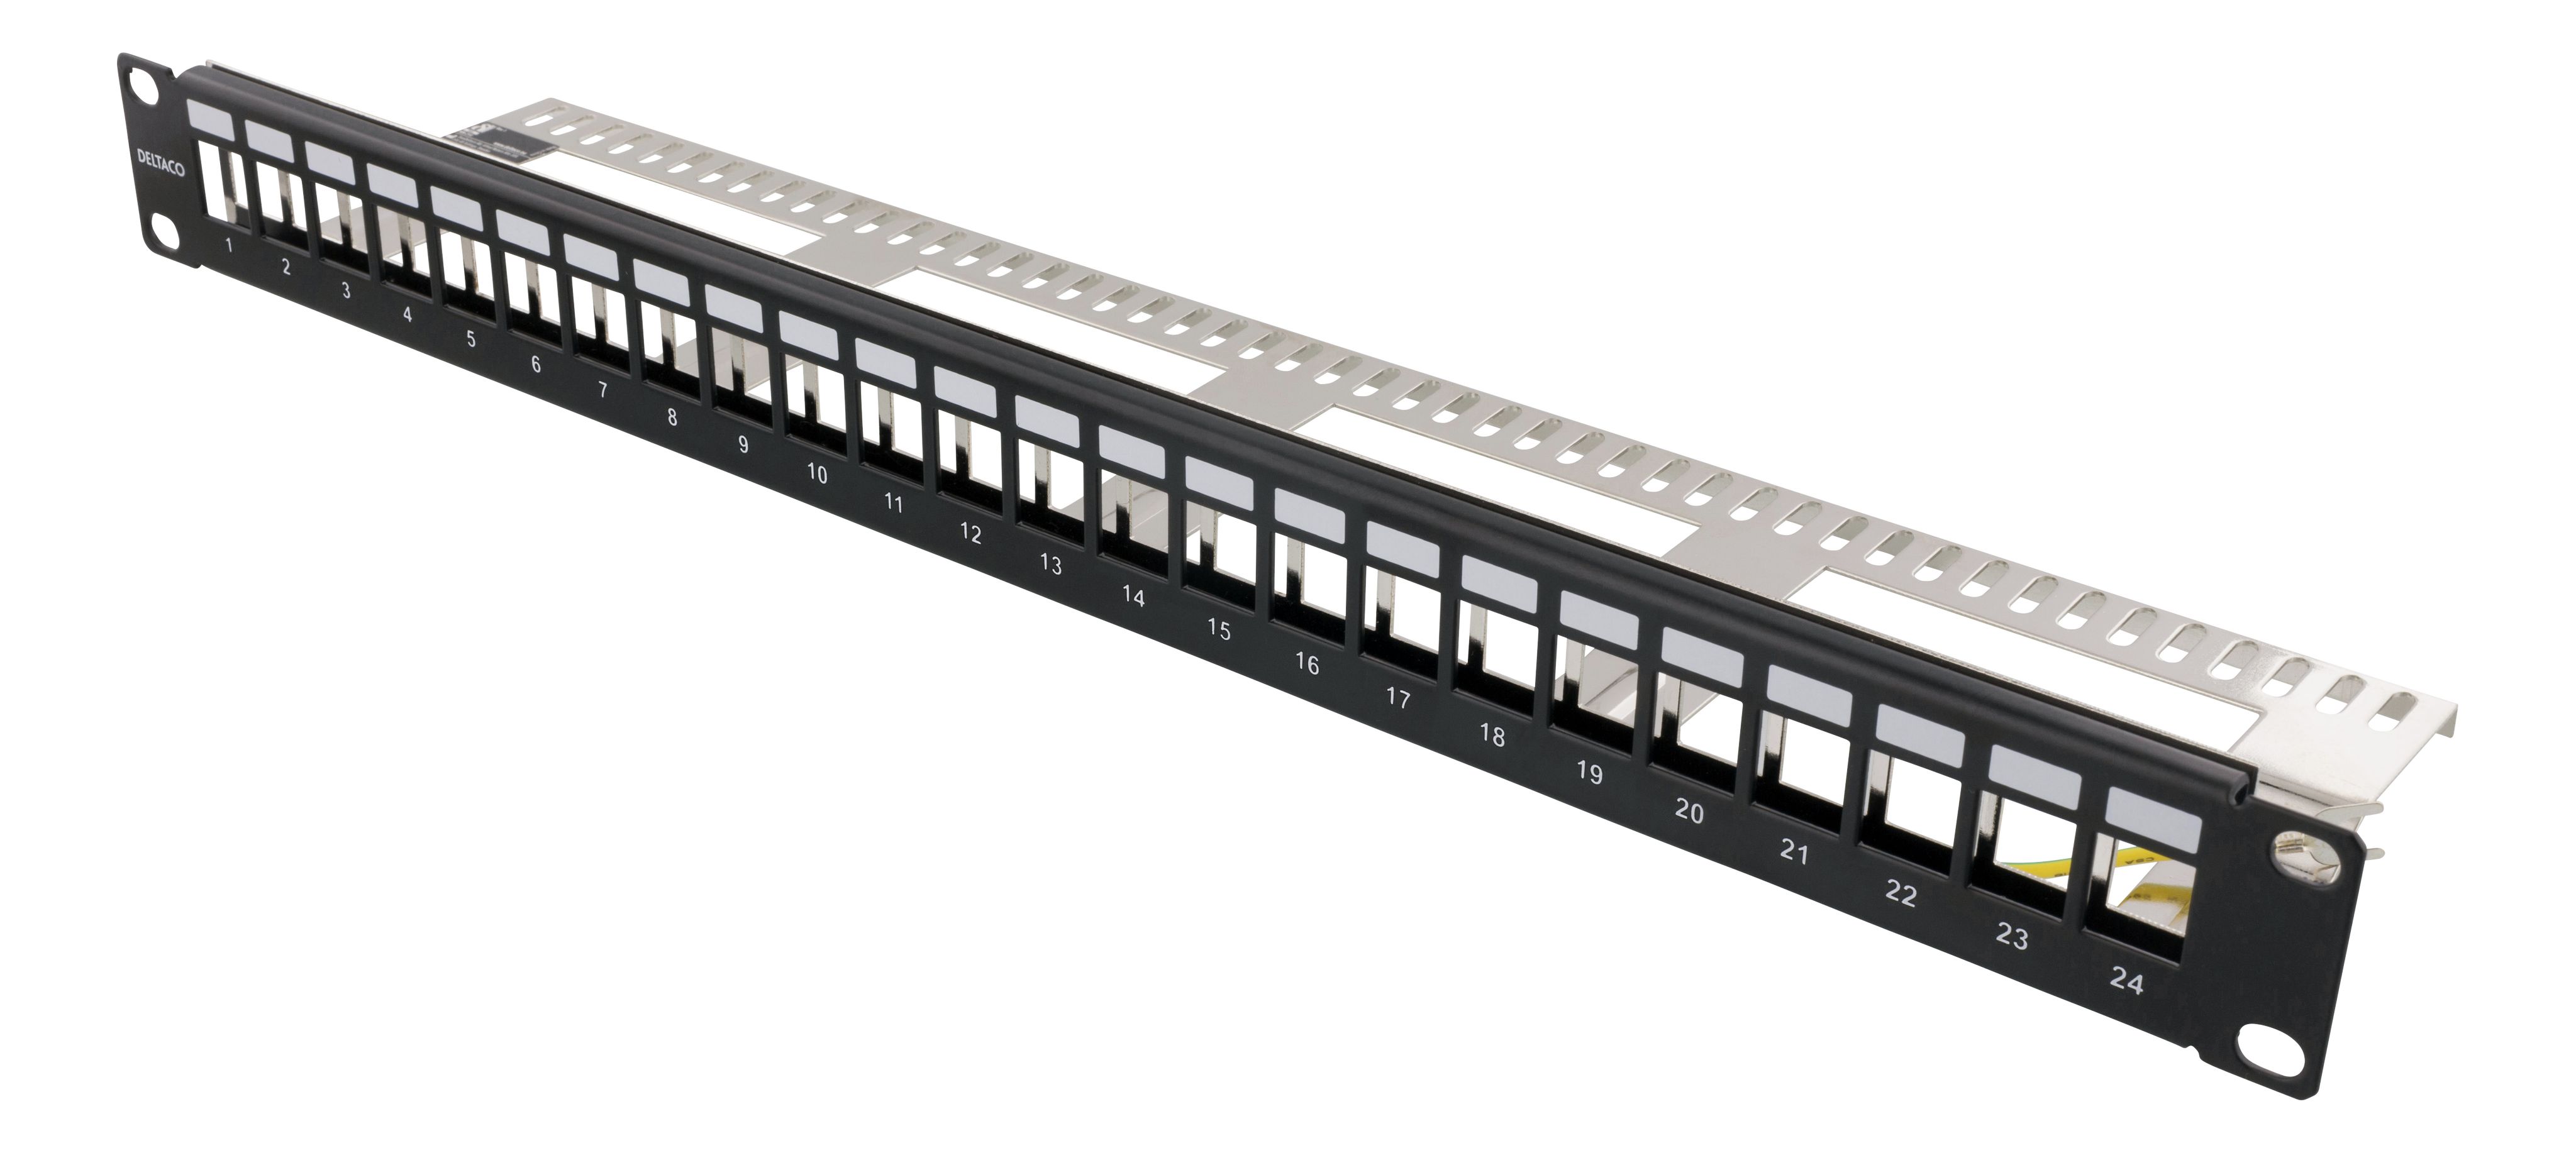 Cp24bly Patch Panel, 24 Port, all Metal, Black